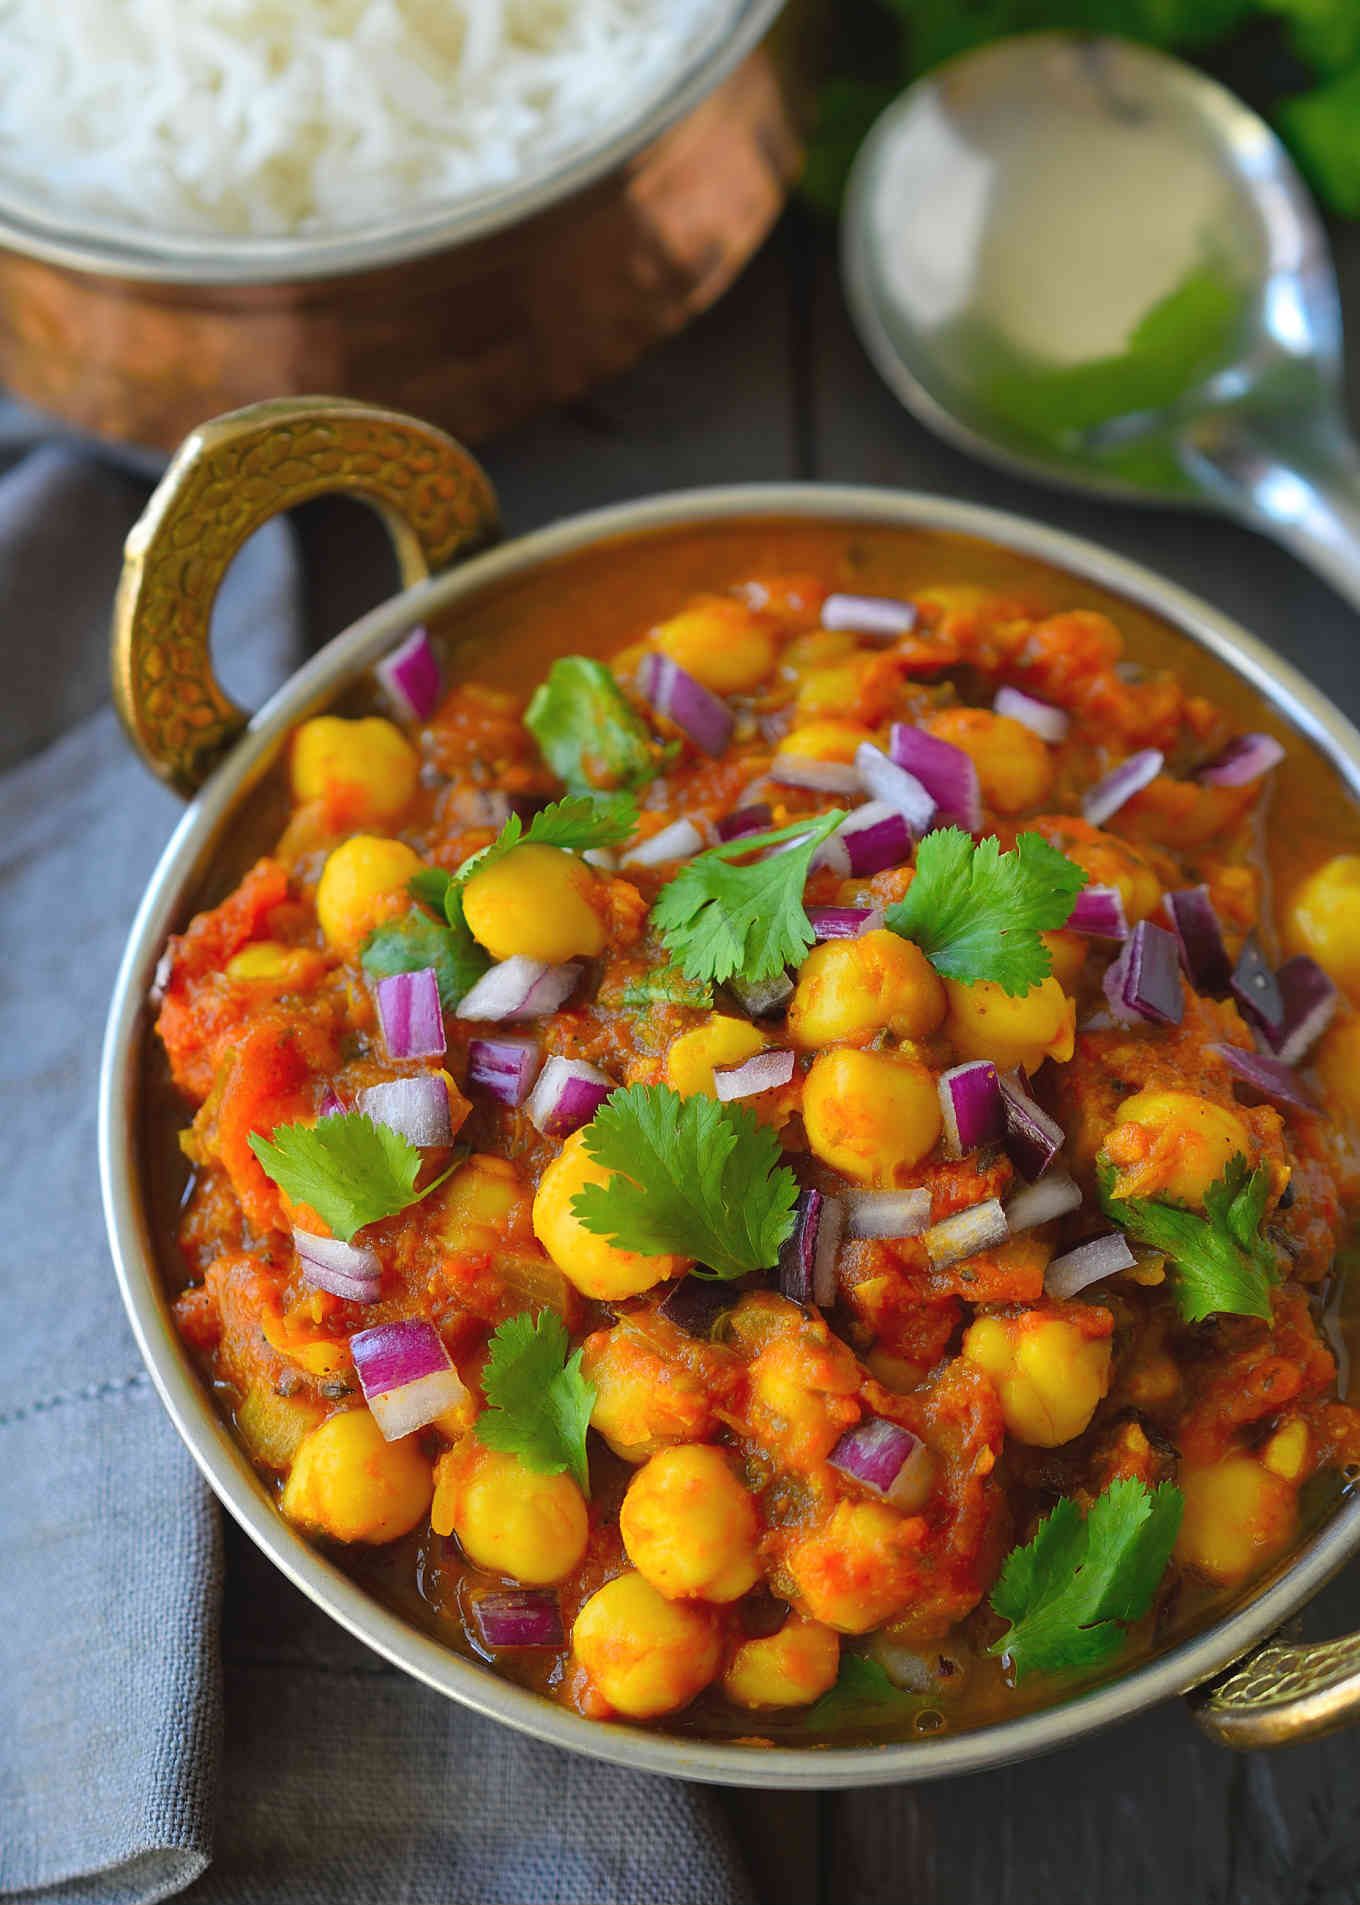 Vegan chickpea curry is an easy and flavourful tomato-based curry great for a weeknight dinner. Adjust the spice level to your preference with this recipe and feel free to add in other greens and veggies like kale, spinach or broccoli for a healthy and satisfying meal! 